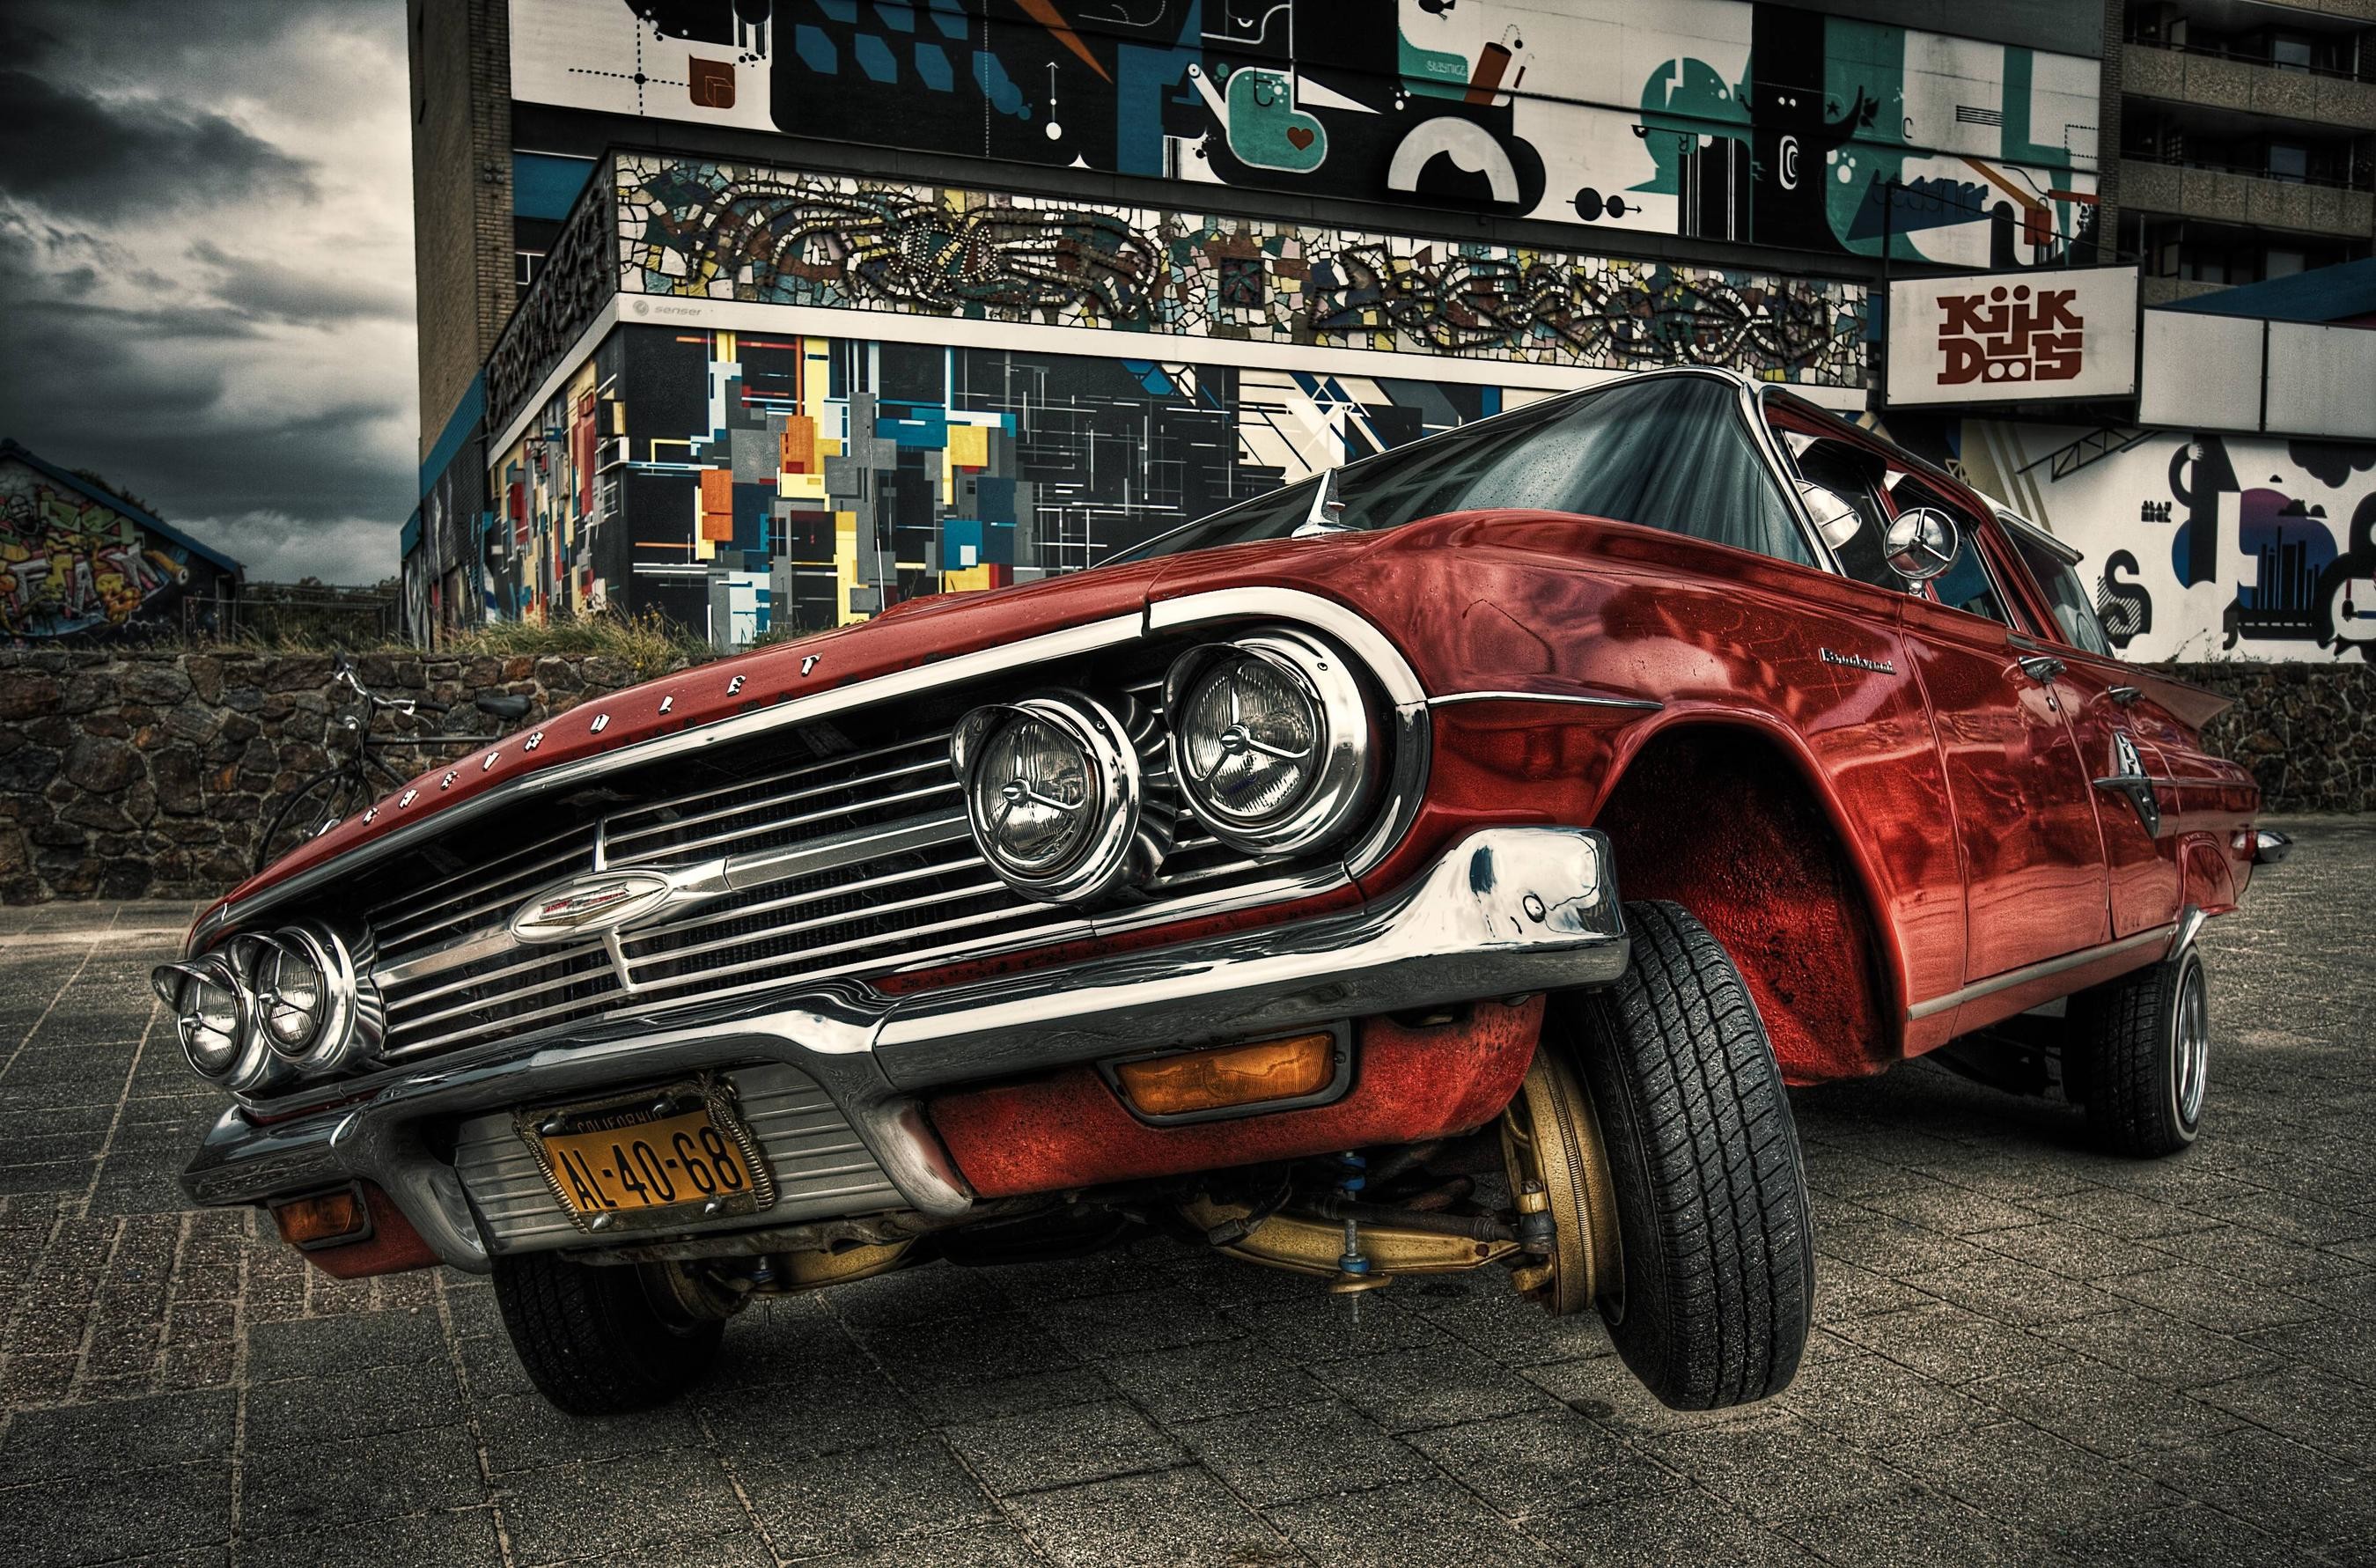 2699x1781 Lowrider Wallpapers, 49 Full High Quality Lowrider Wallpapers (In ..